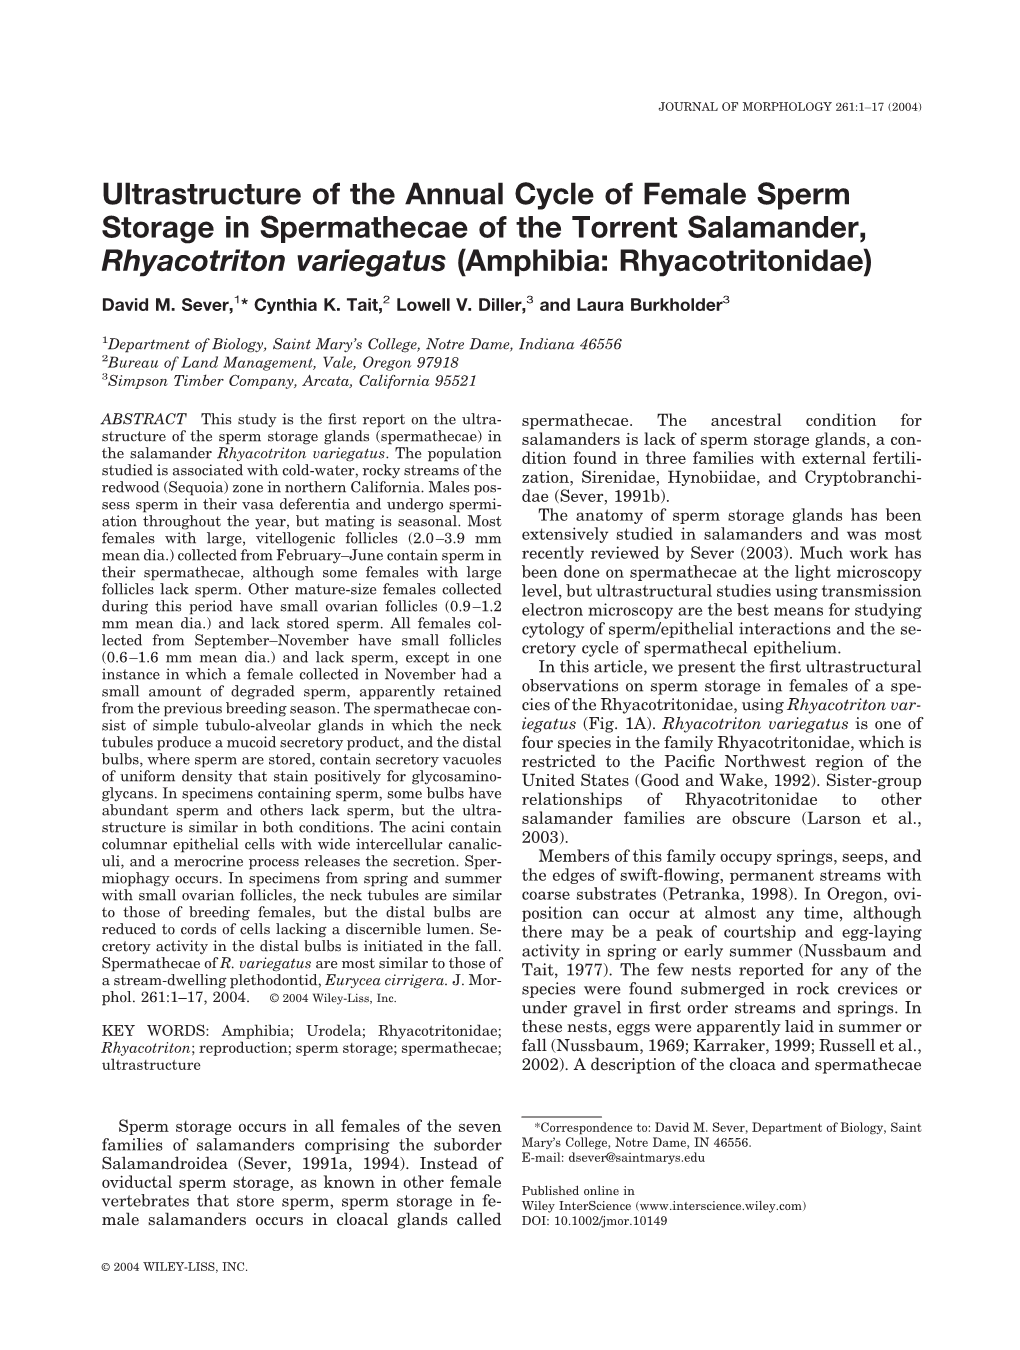 Ultrastructure of the Annual Cycle of Female Sperm Storage in Spermathecae of the Torrent Salamander, Rhyacotriton Variegatus (Amphibia: Rhyacotritonidae)